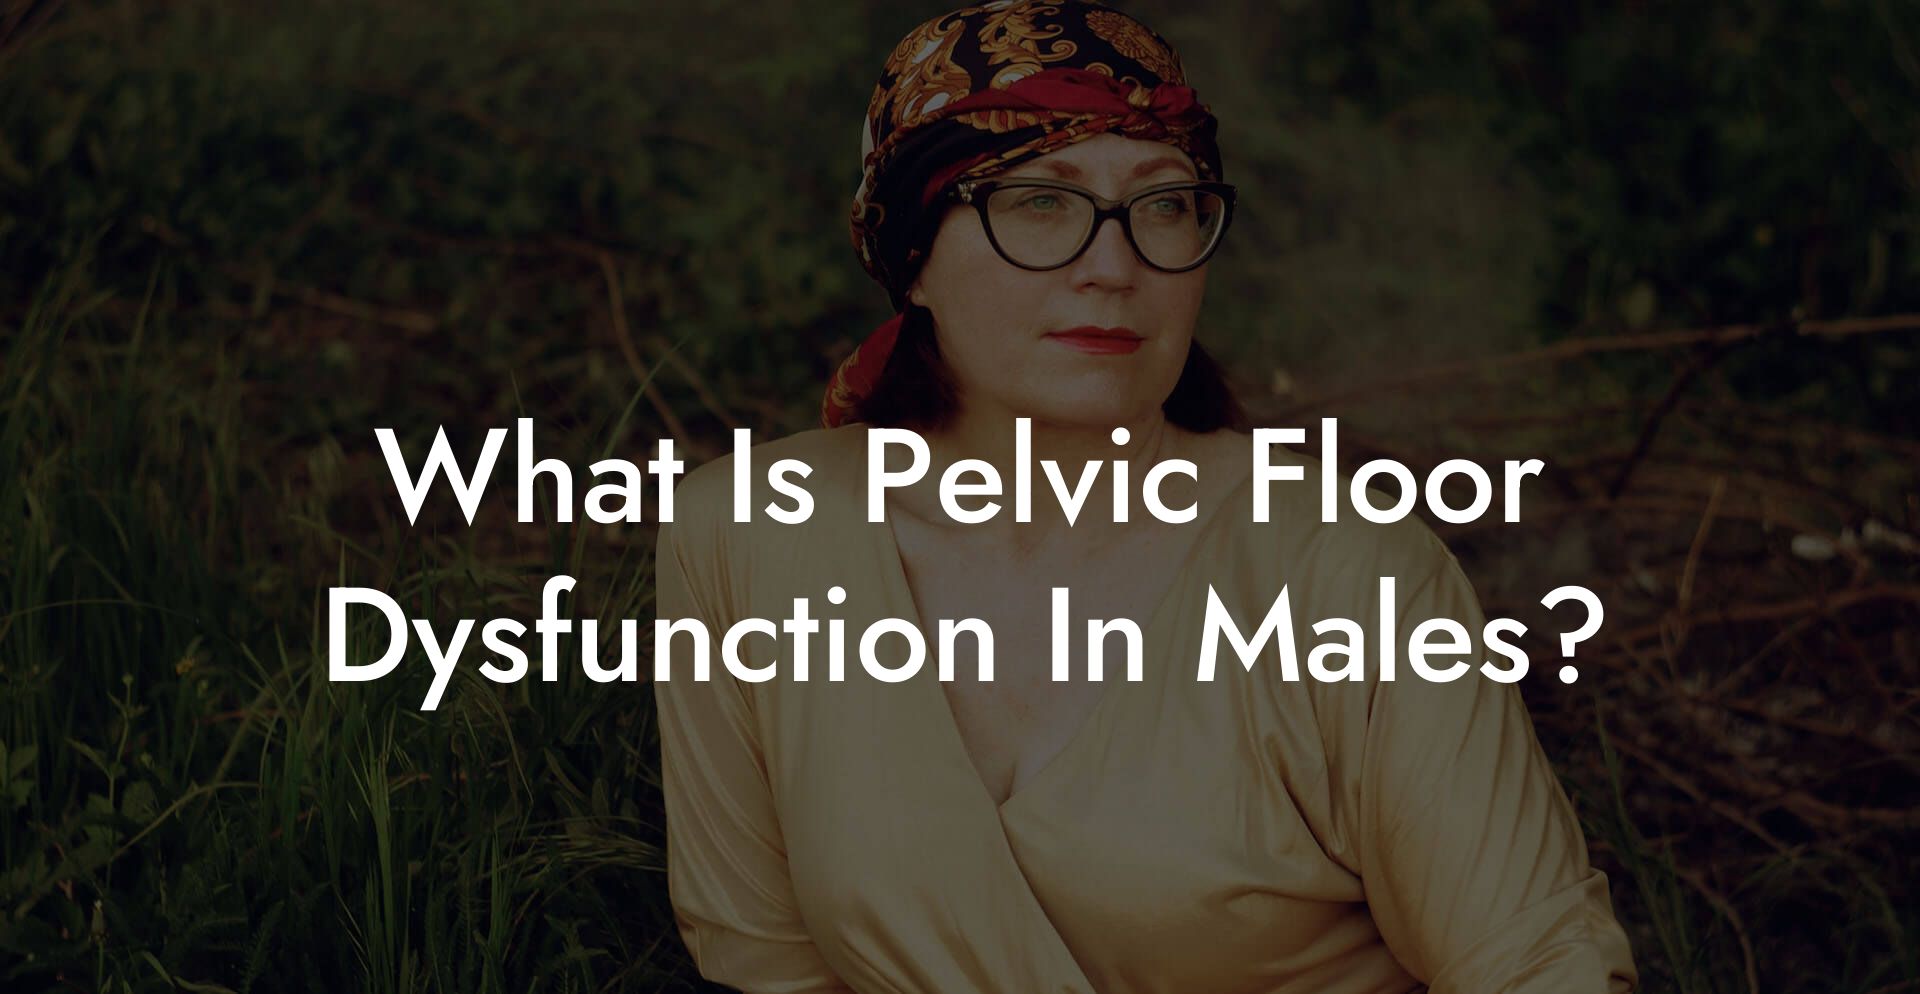 What Is Pelvic Floor Dysfunction In Males?